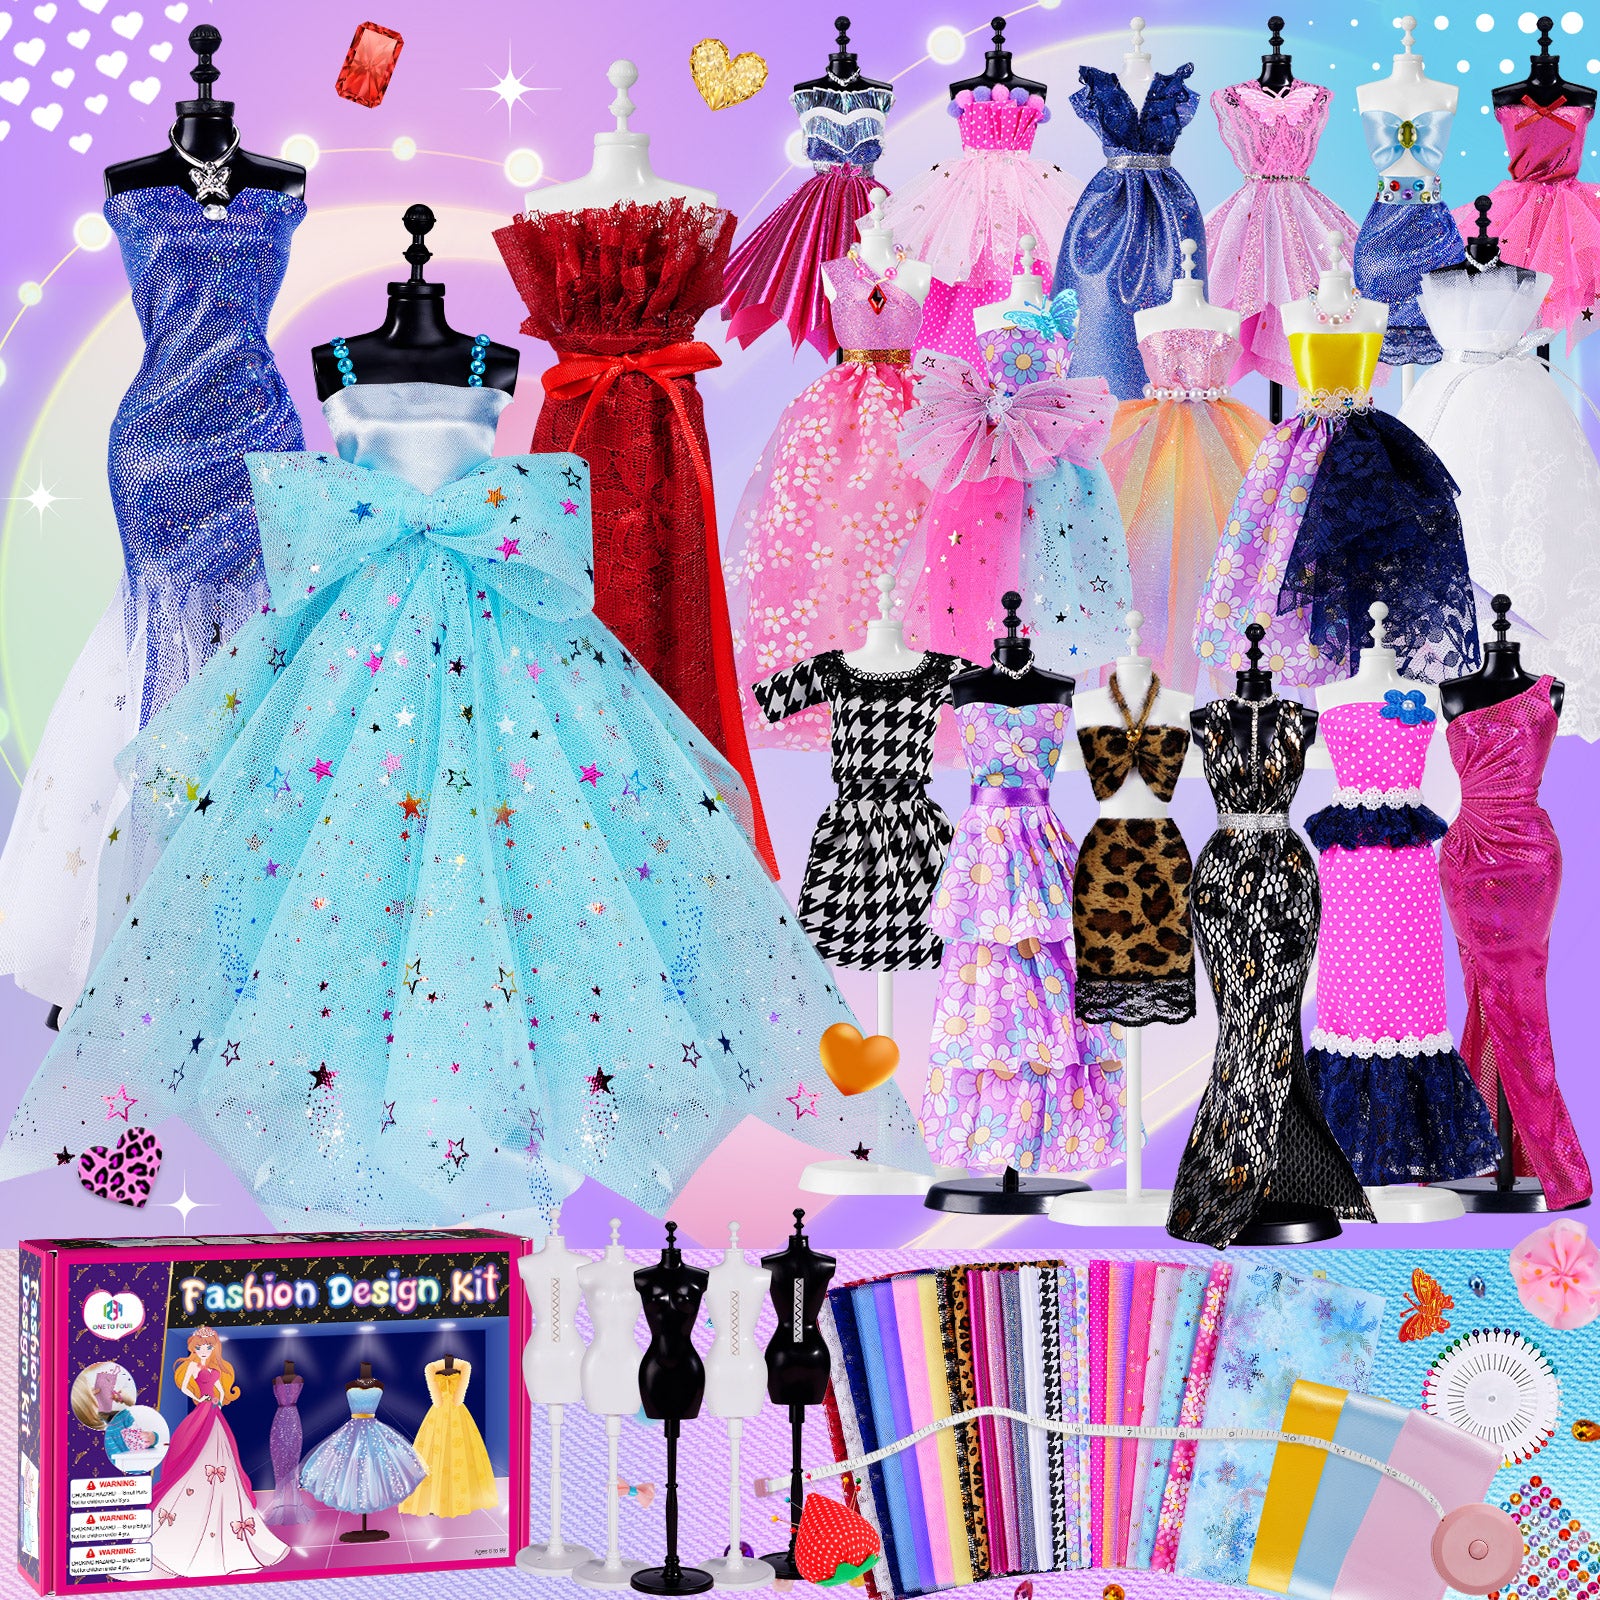  Fashion Designer Kits for Girls. Drape & Tie Fabrics, Unisex  Patterns, Draft & Re-Design Patterns, Learn to Sew A Wedding Dress & More  For The Doll Plus Design & Sew Wrap